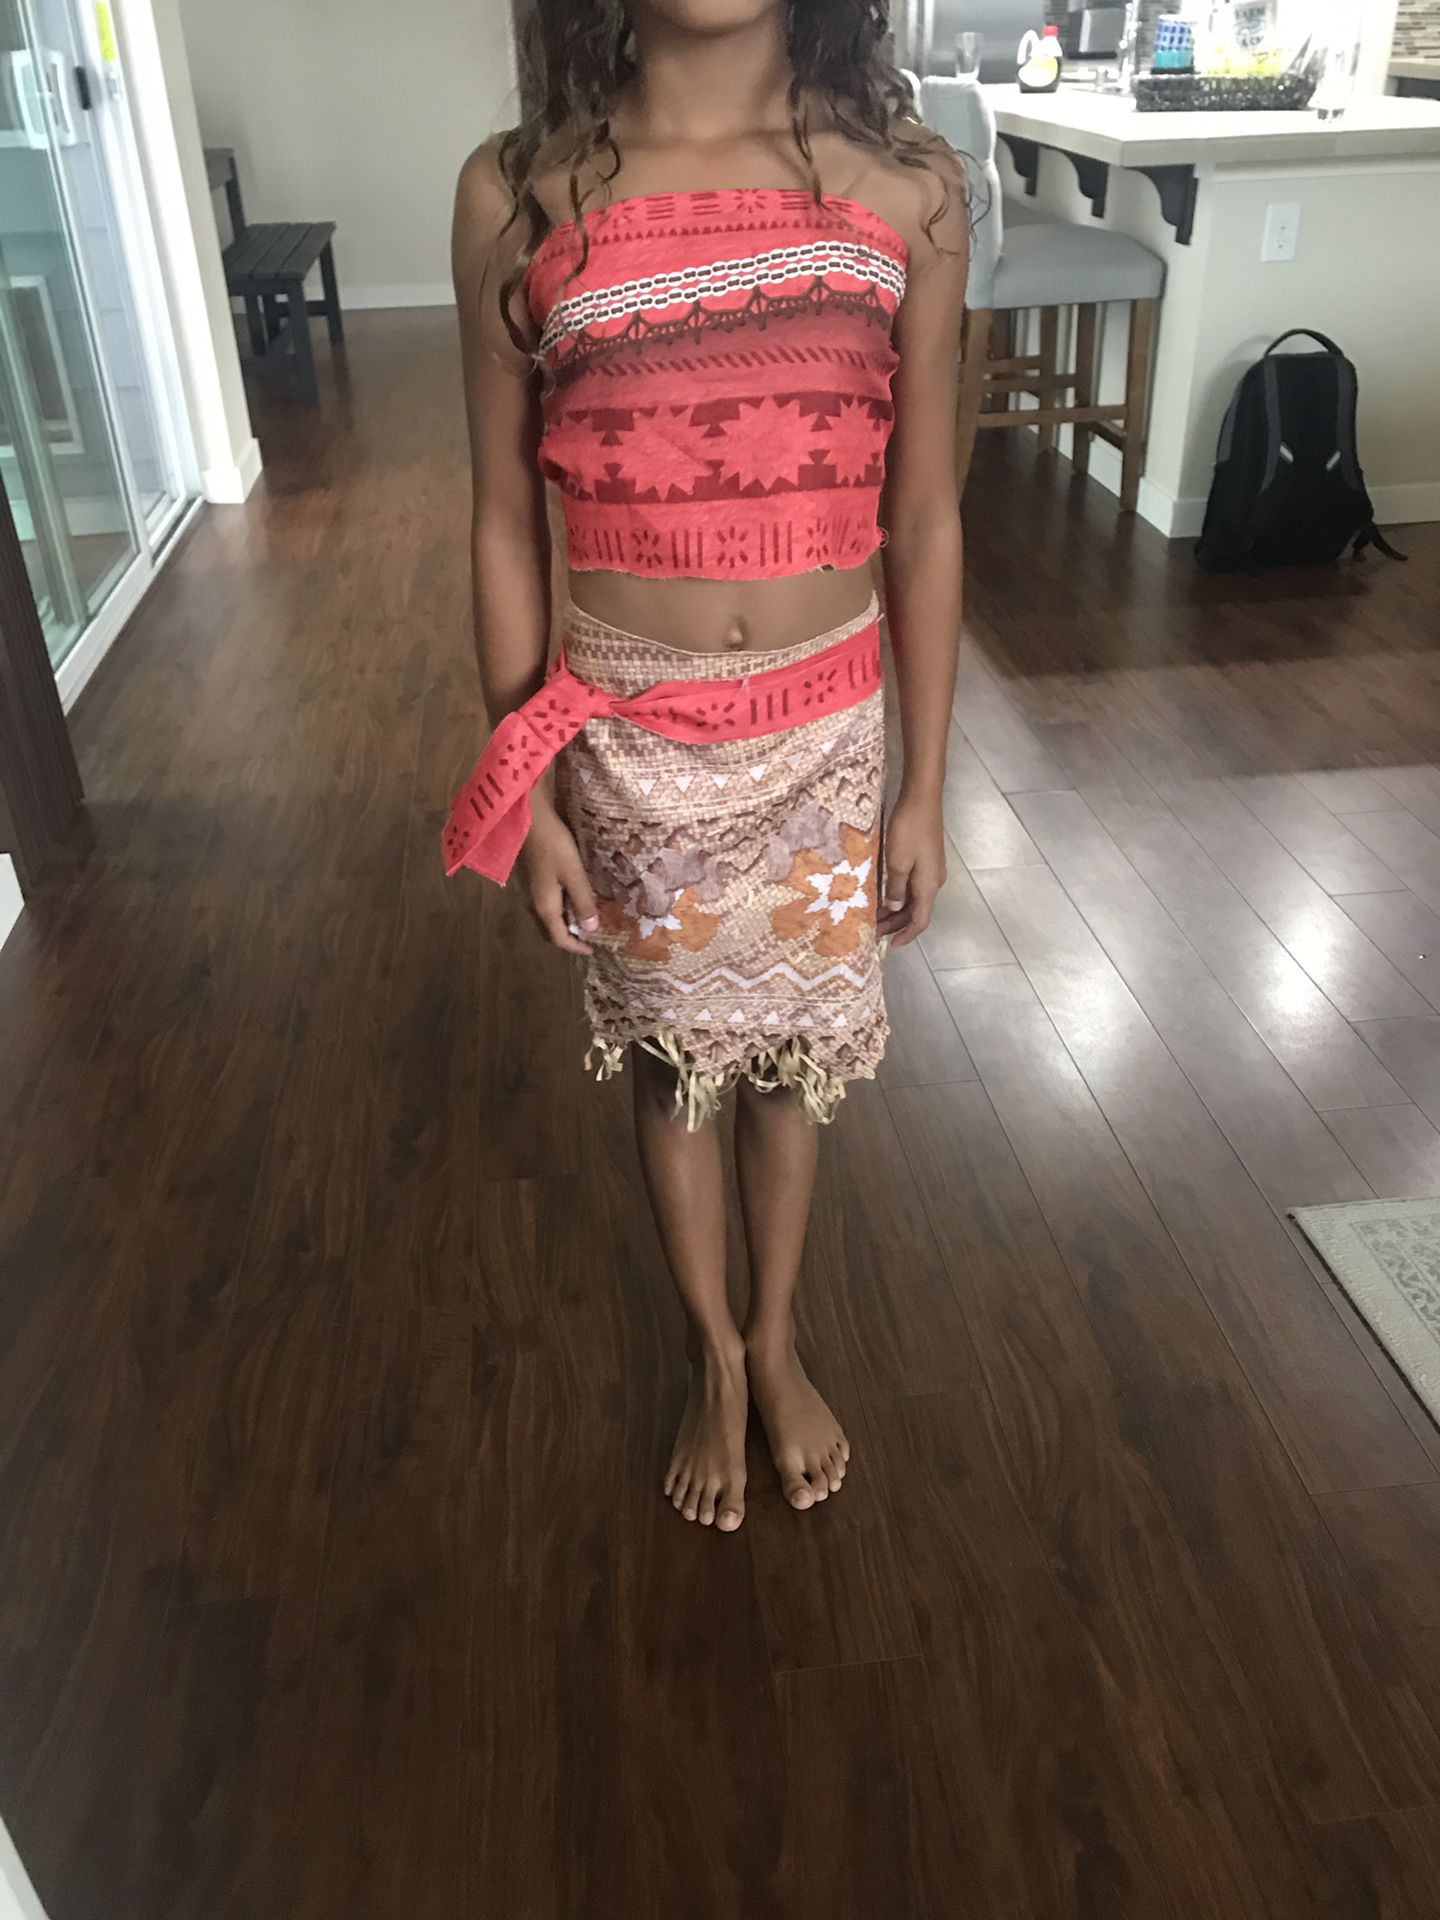 Moana costume and necklace